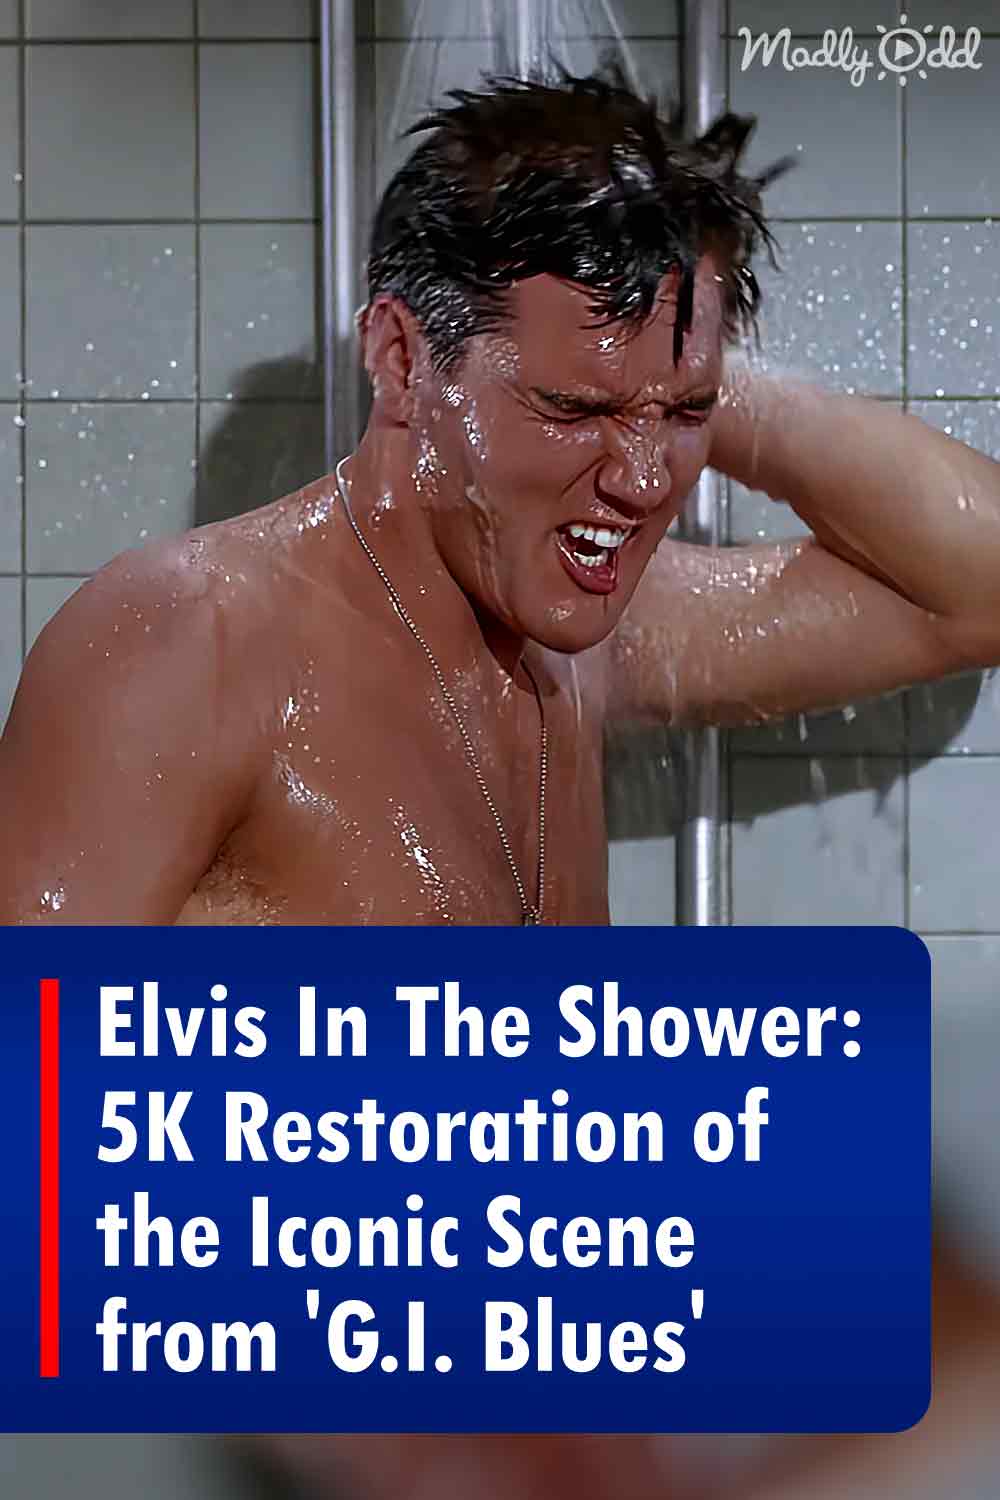 Elvis In The Shower: 5K Restoration of the Iconic Scene from \'G.I. Blues\'